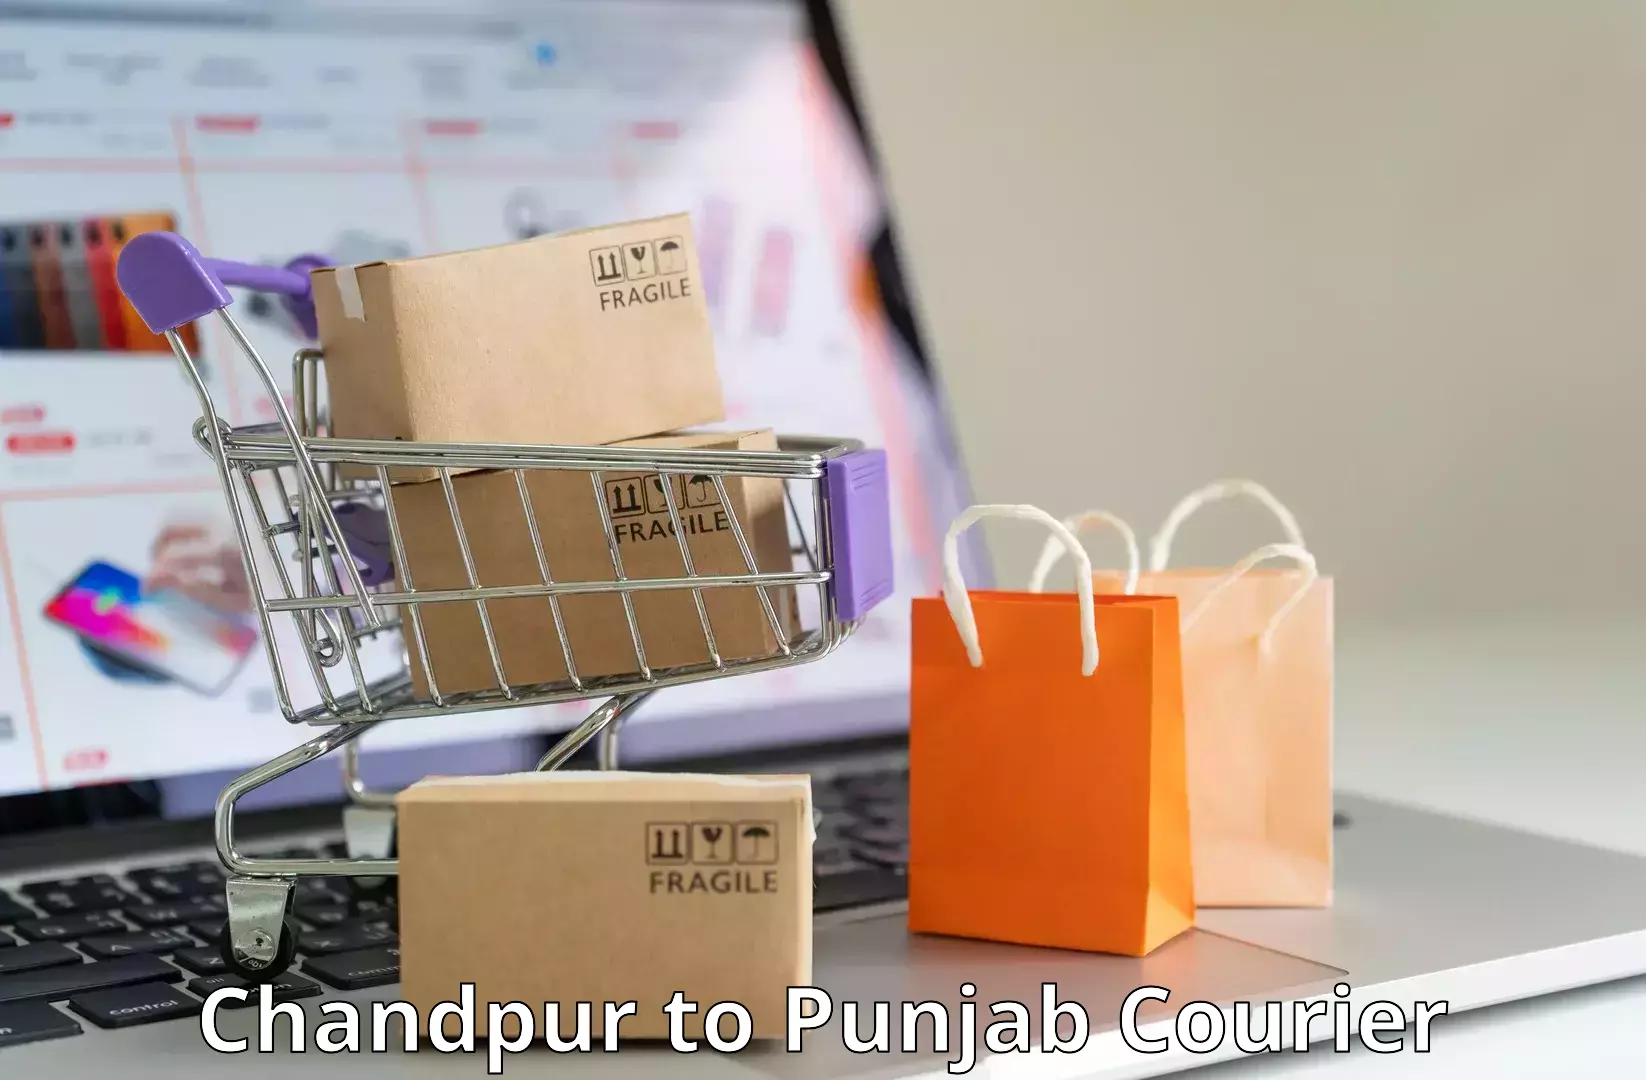 Express mail solutions Chandpur to Central University of Punjab Bathinda